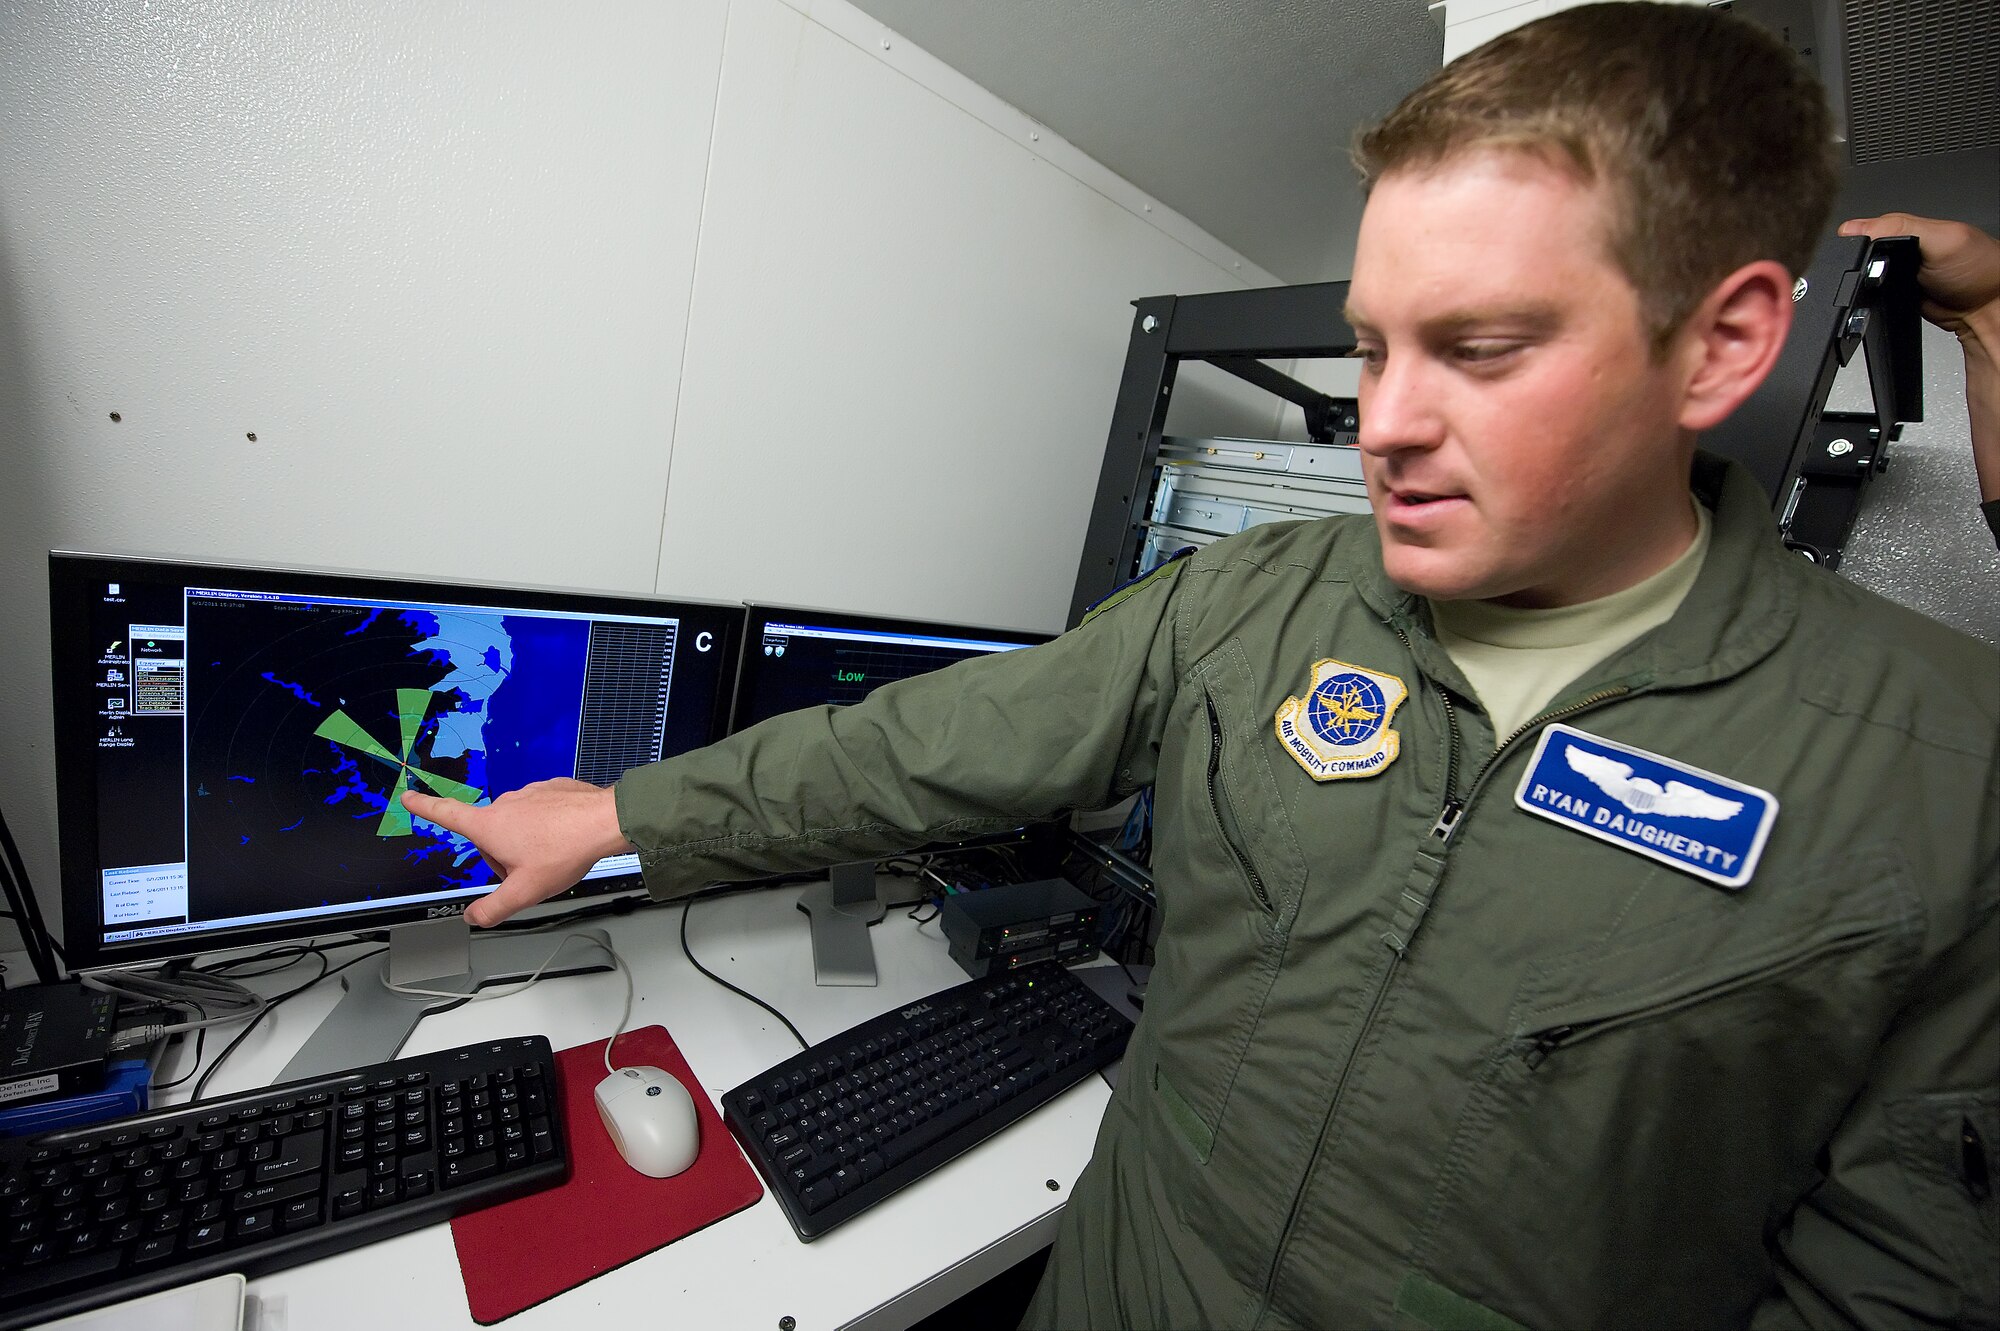 Captain Ryan Daugherty, 436th Airlift Wing Safety flight safety officer, explains how radar actively reduces bird strikes June 1, 2011 at Dover Air Force Base, Del. (U.S. Air Force photo by Steve Kotecki)